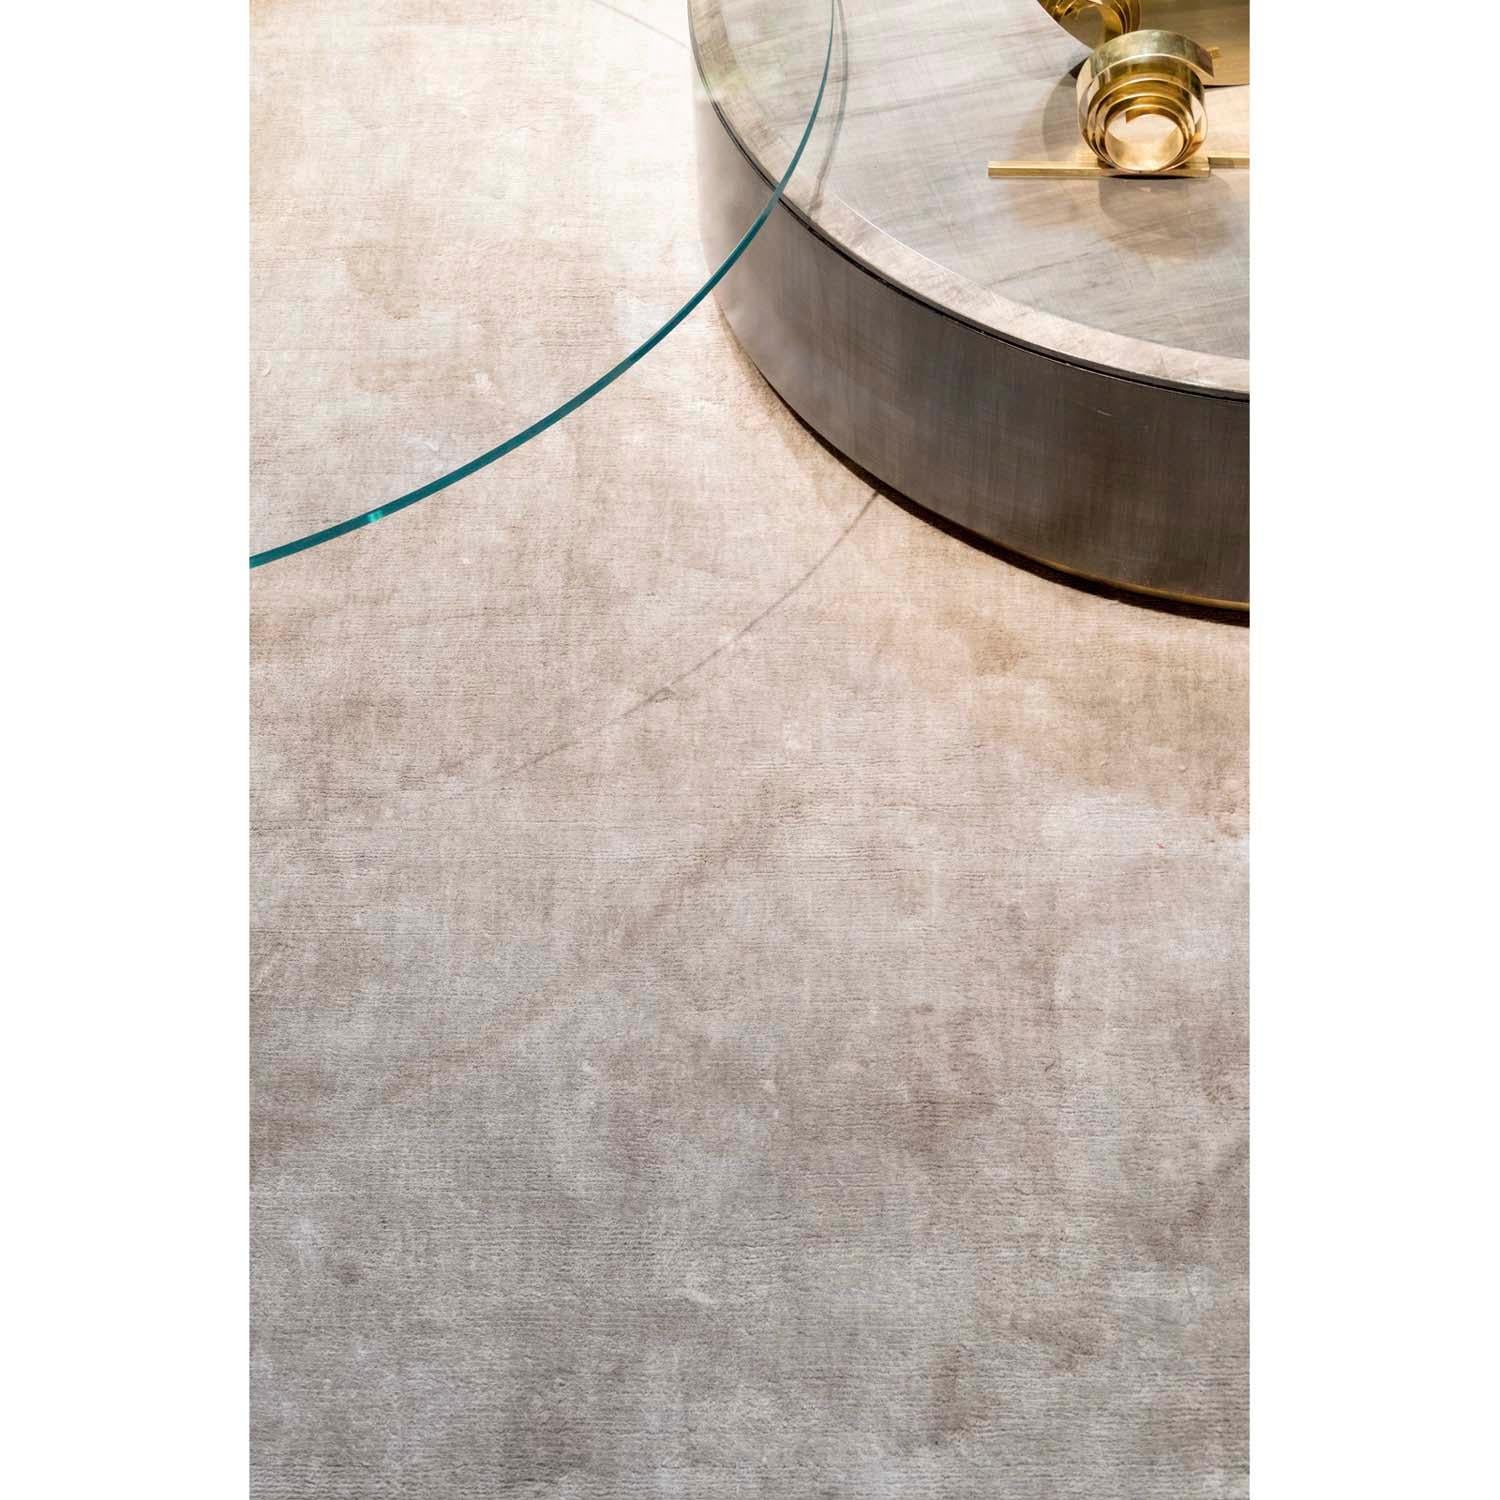 Modern Contemporary Sustainable Shiny Ecru Rug by Deanna Comellini In Stock 200x300 cm For Sale